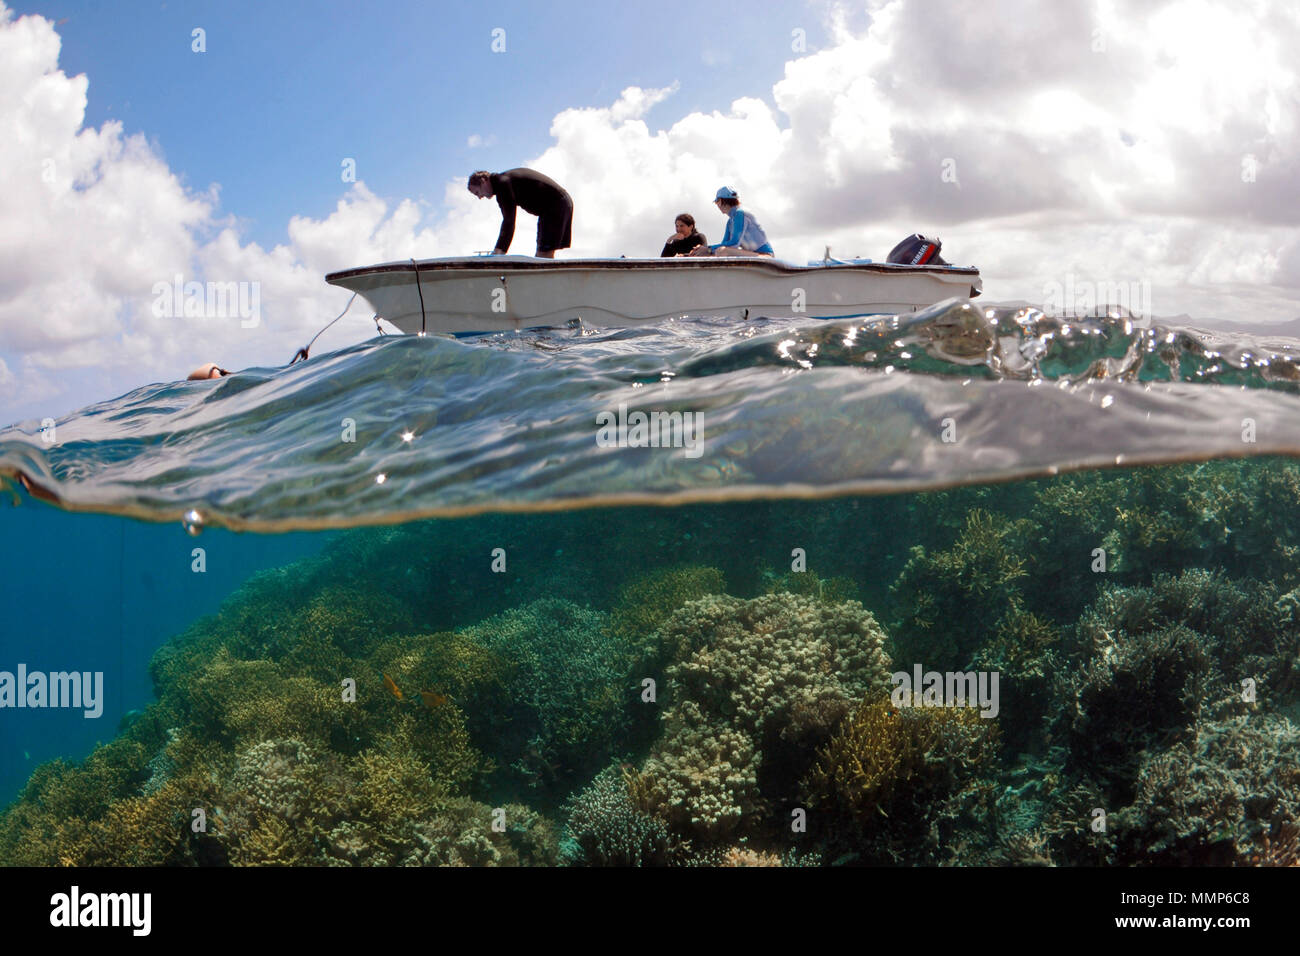 People enjoying the outdoors a small skiff over a pristine  tropical reef, Pohnpei, Federated States of Micronesia Stock Photo